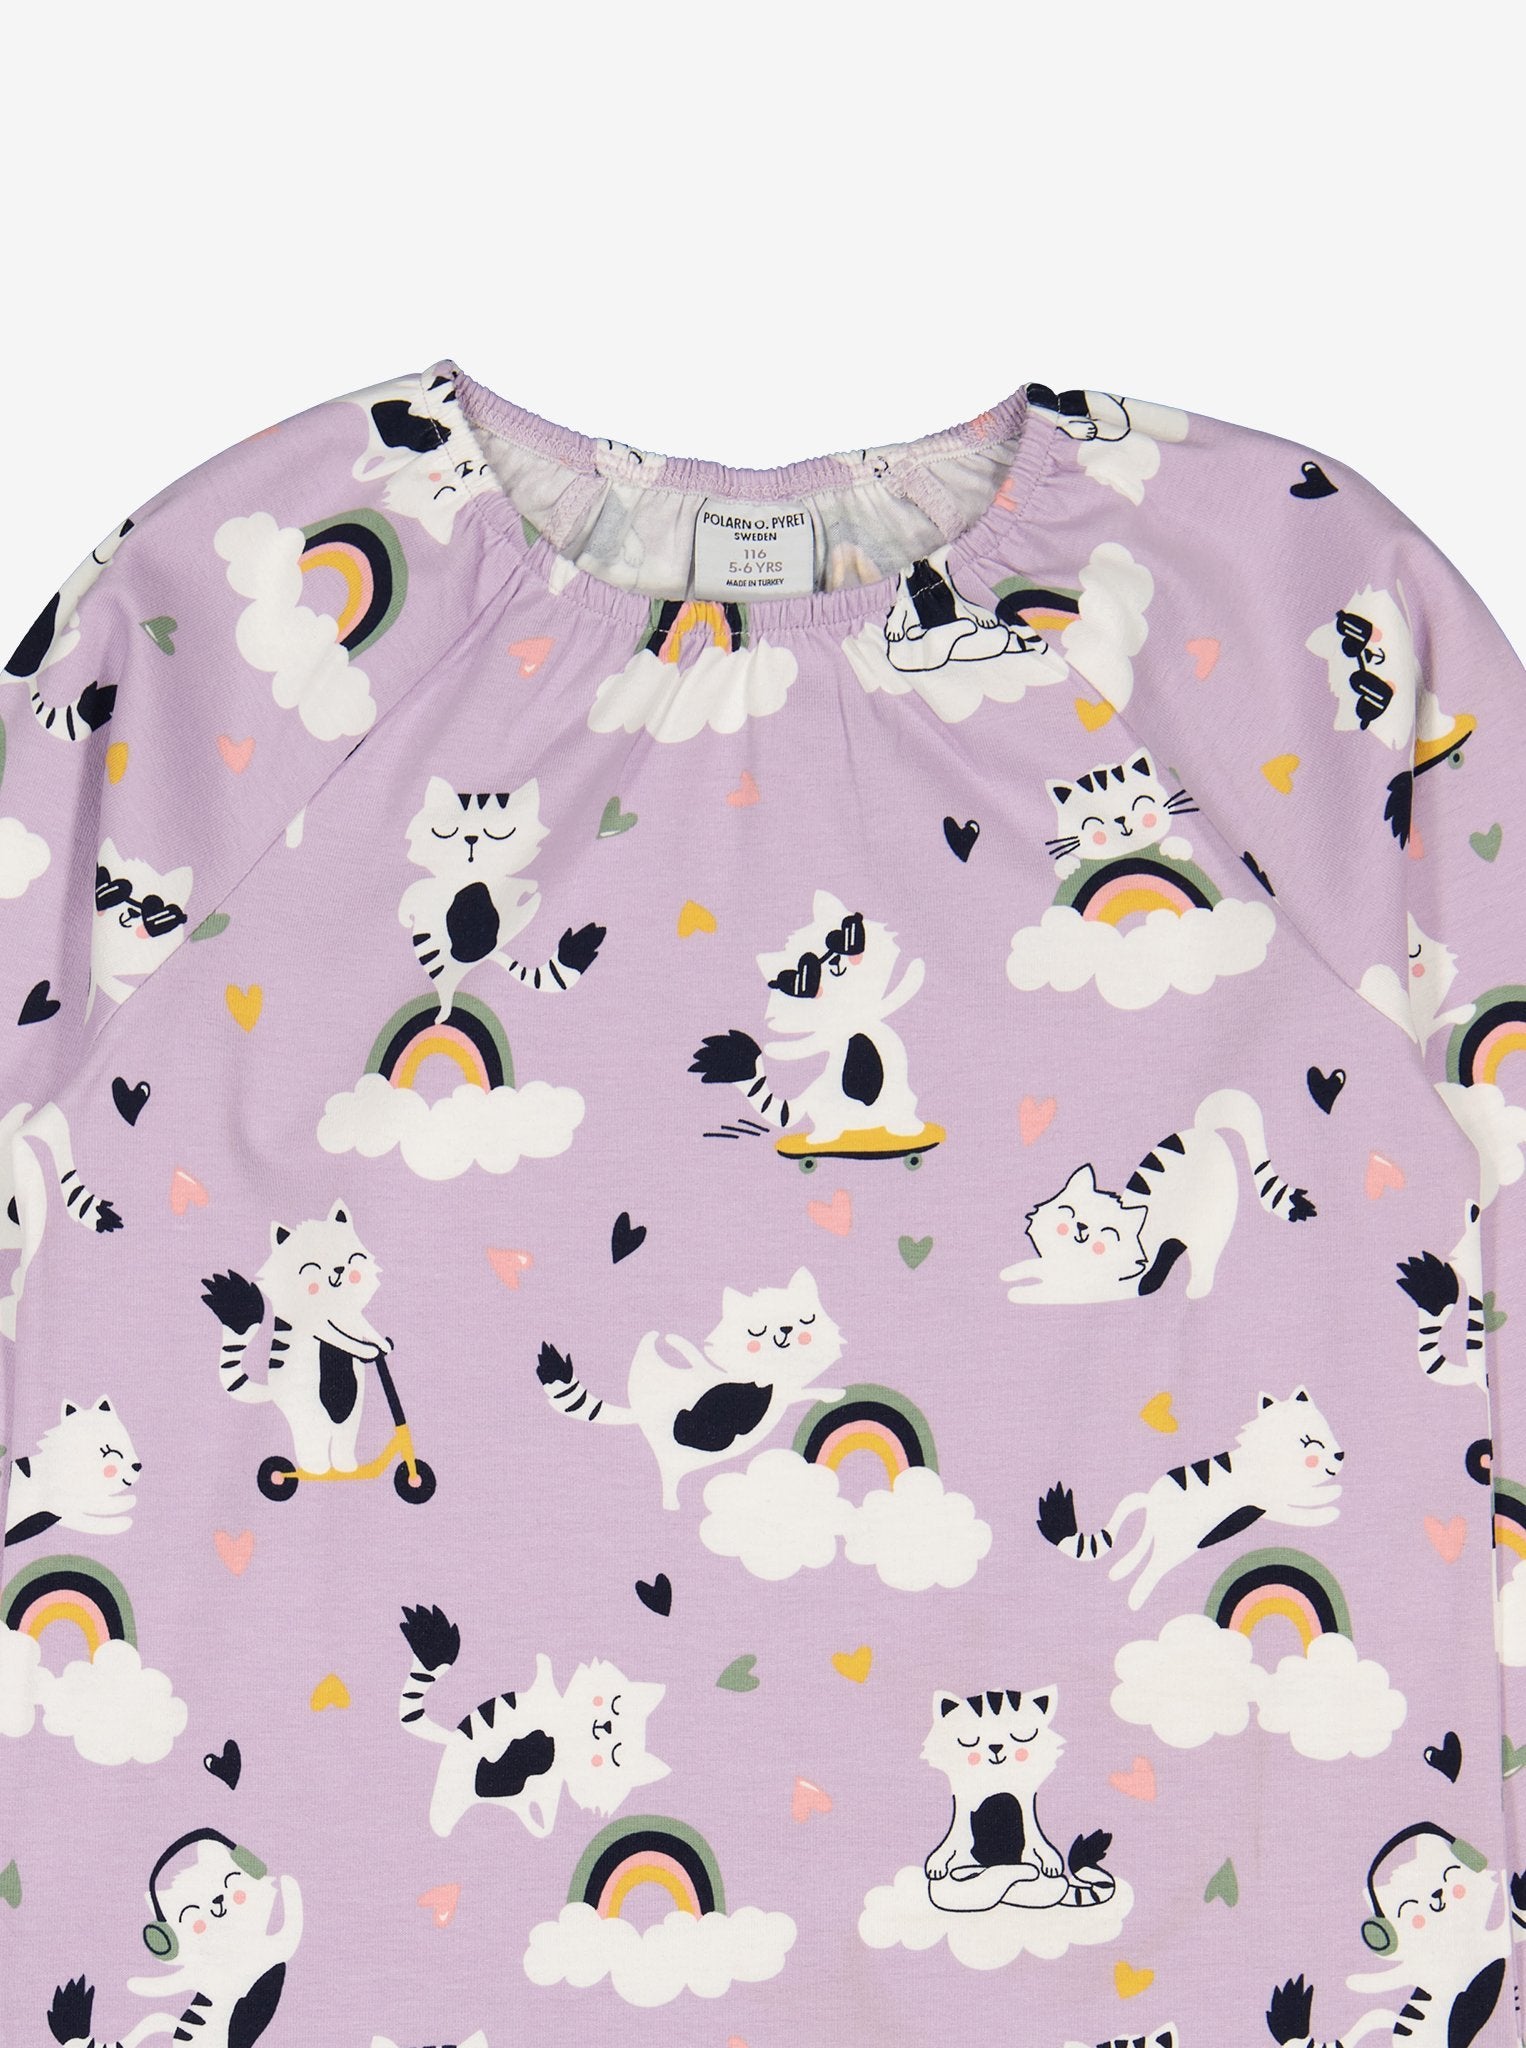  Organic Pink Cat Print Kids Top from Polarn O. Pyret Kidswear. Made from environmentally friendly materials.